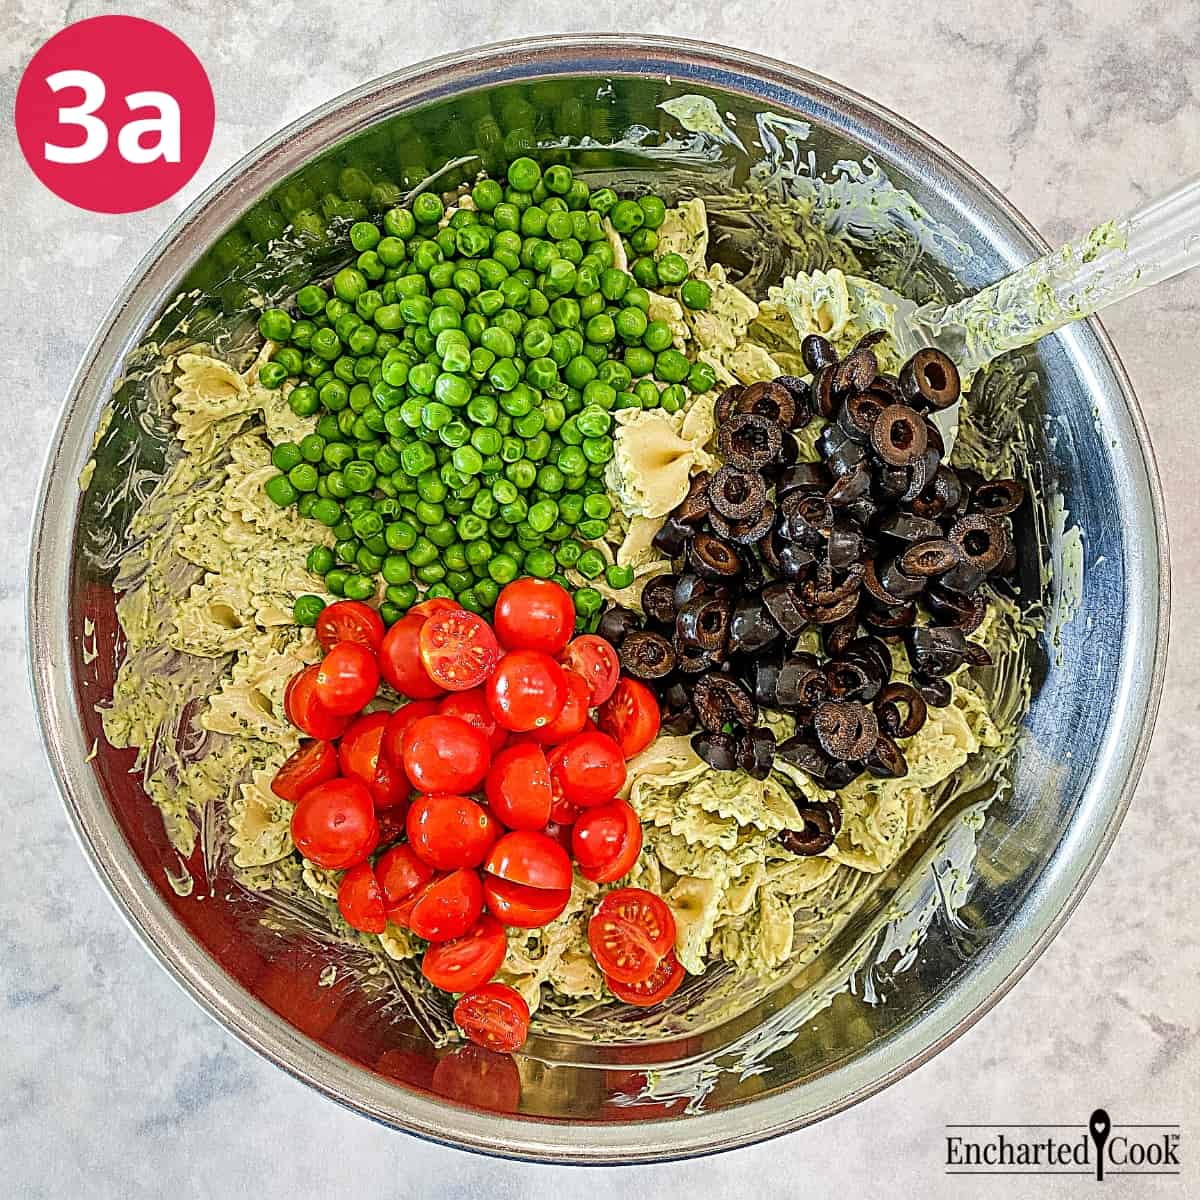 Process Photo 3a - Green peas, sliced black olives, and halved cherry tomatoes are added to the pasta and dressing.